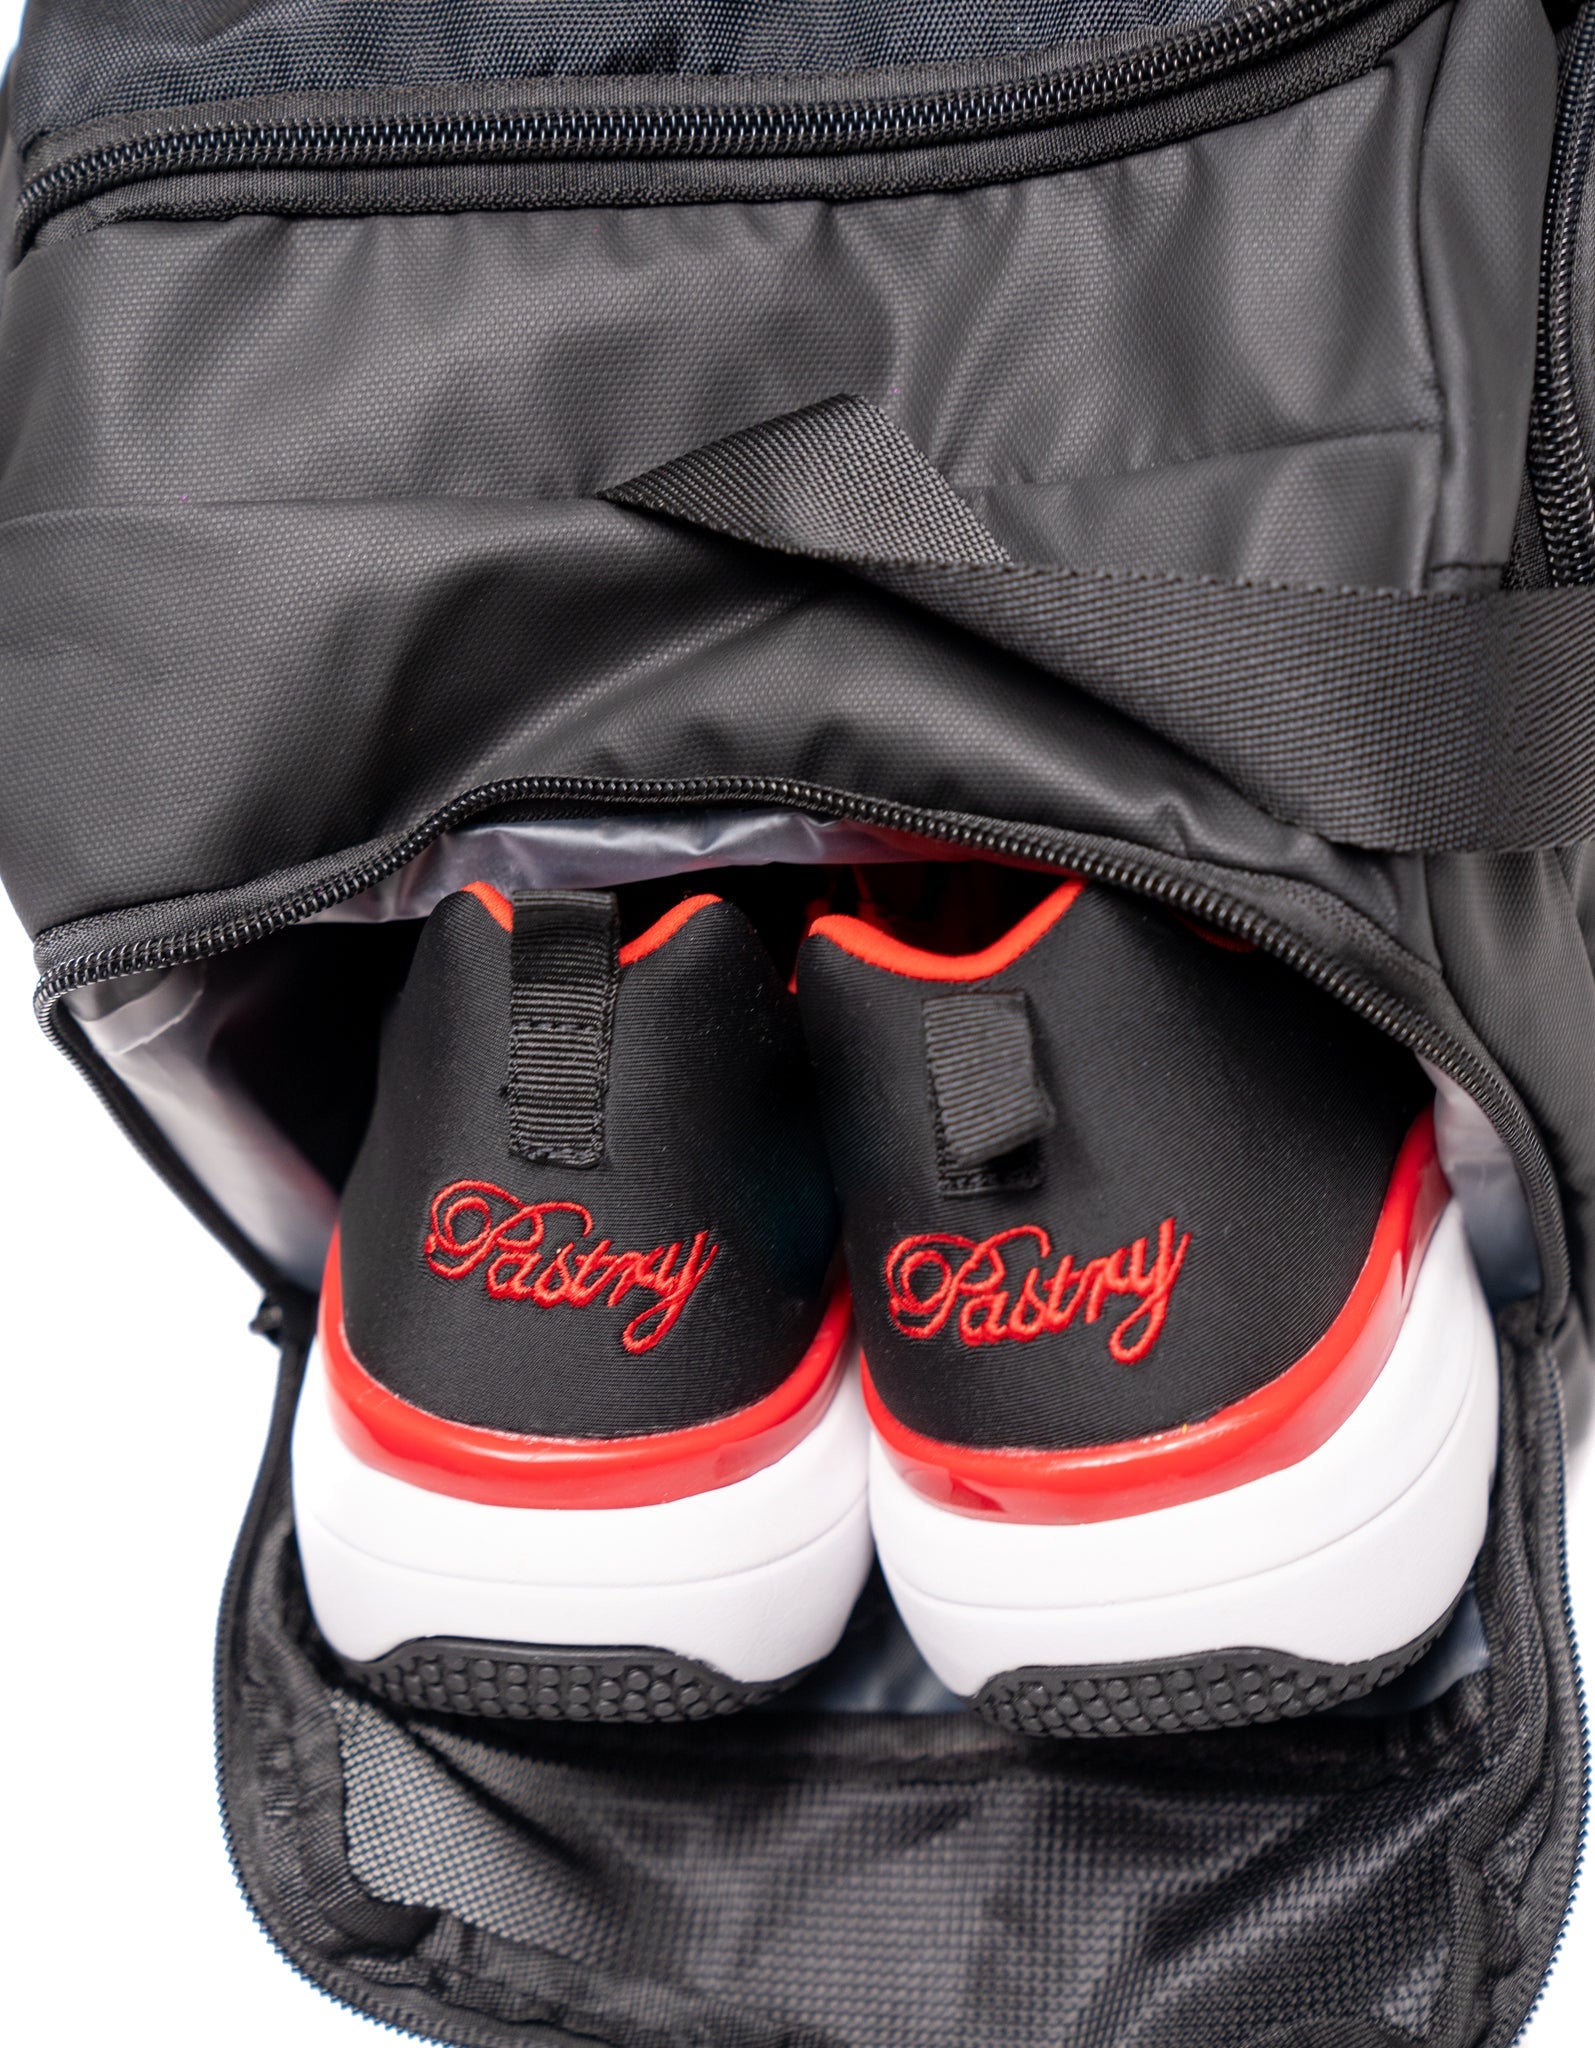 Pastry Duffle Bag Solid Black with shoes inside